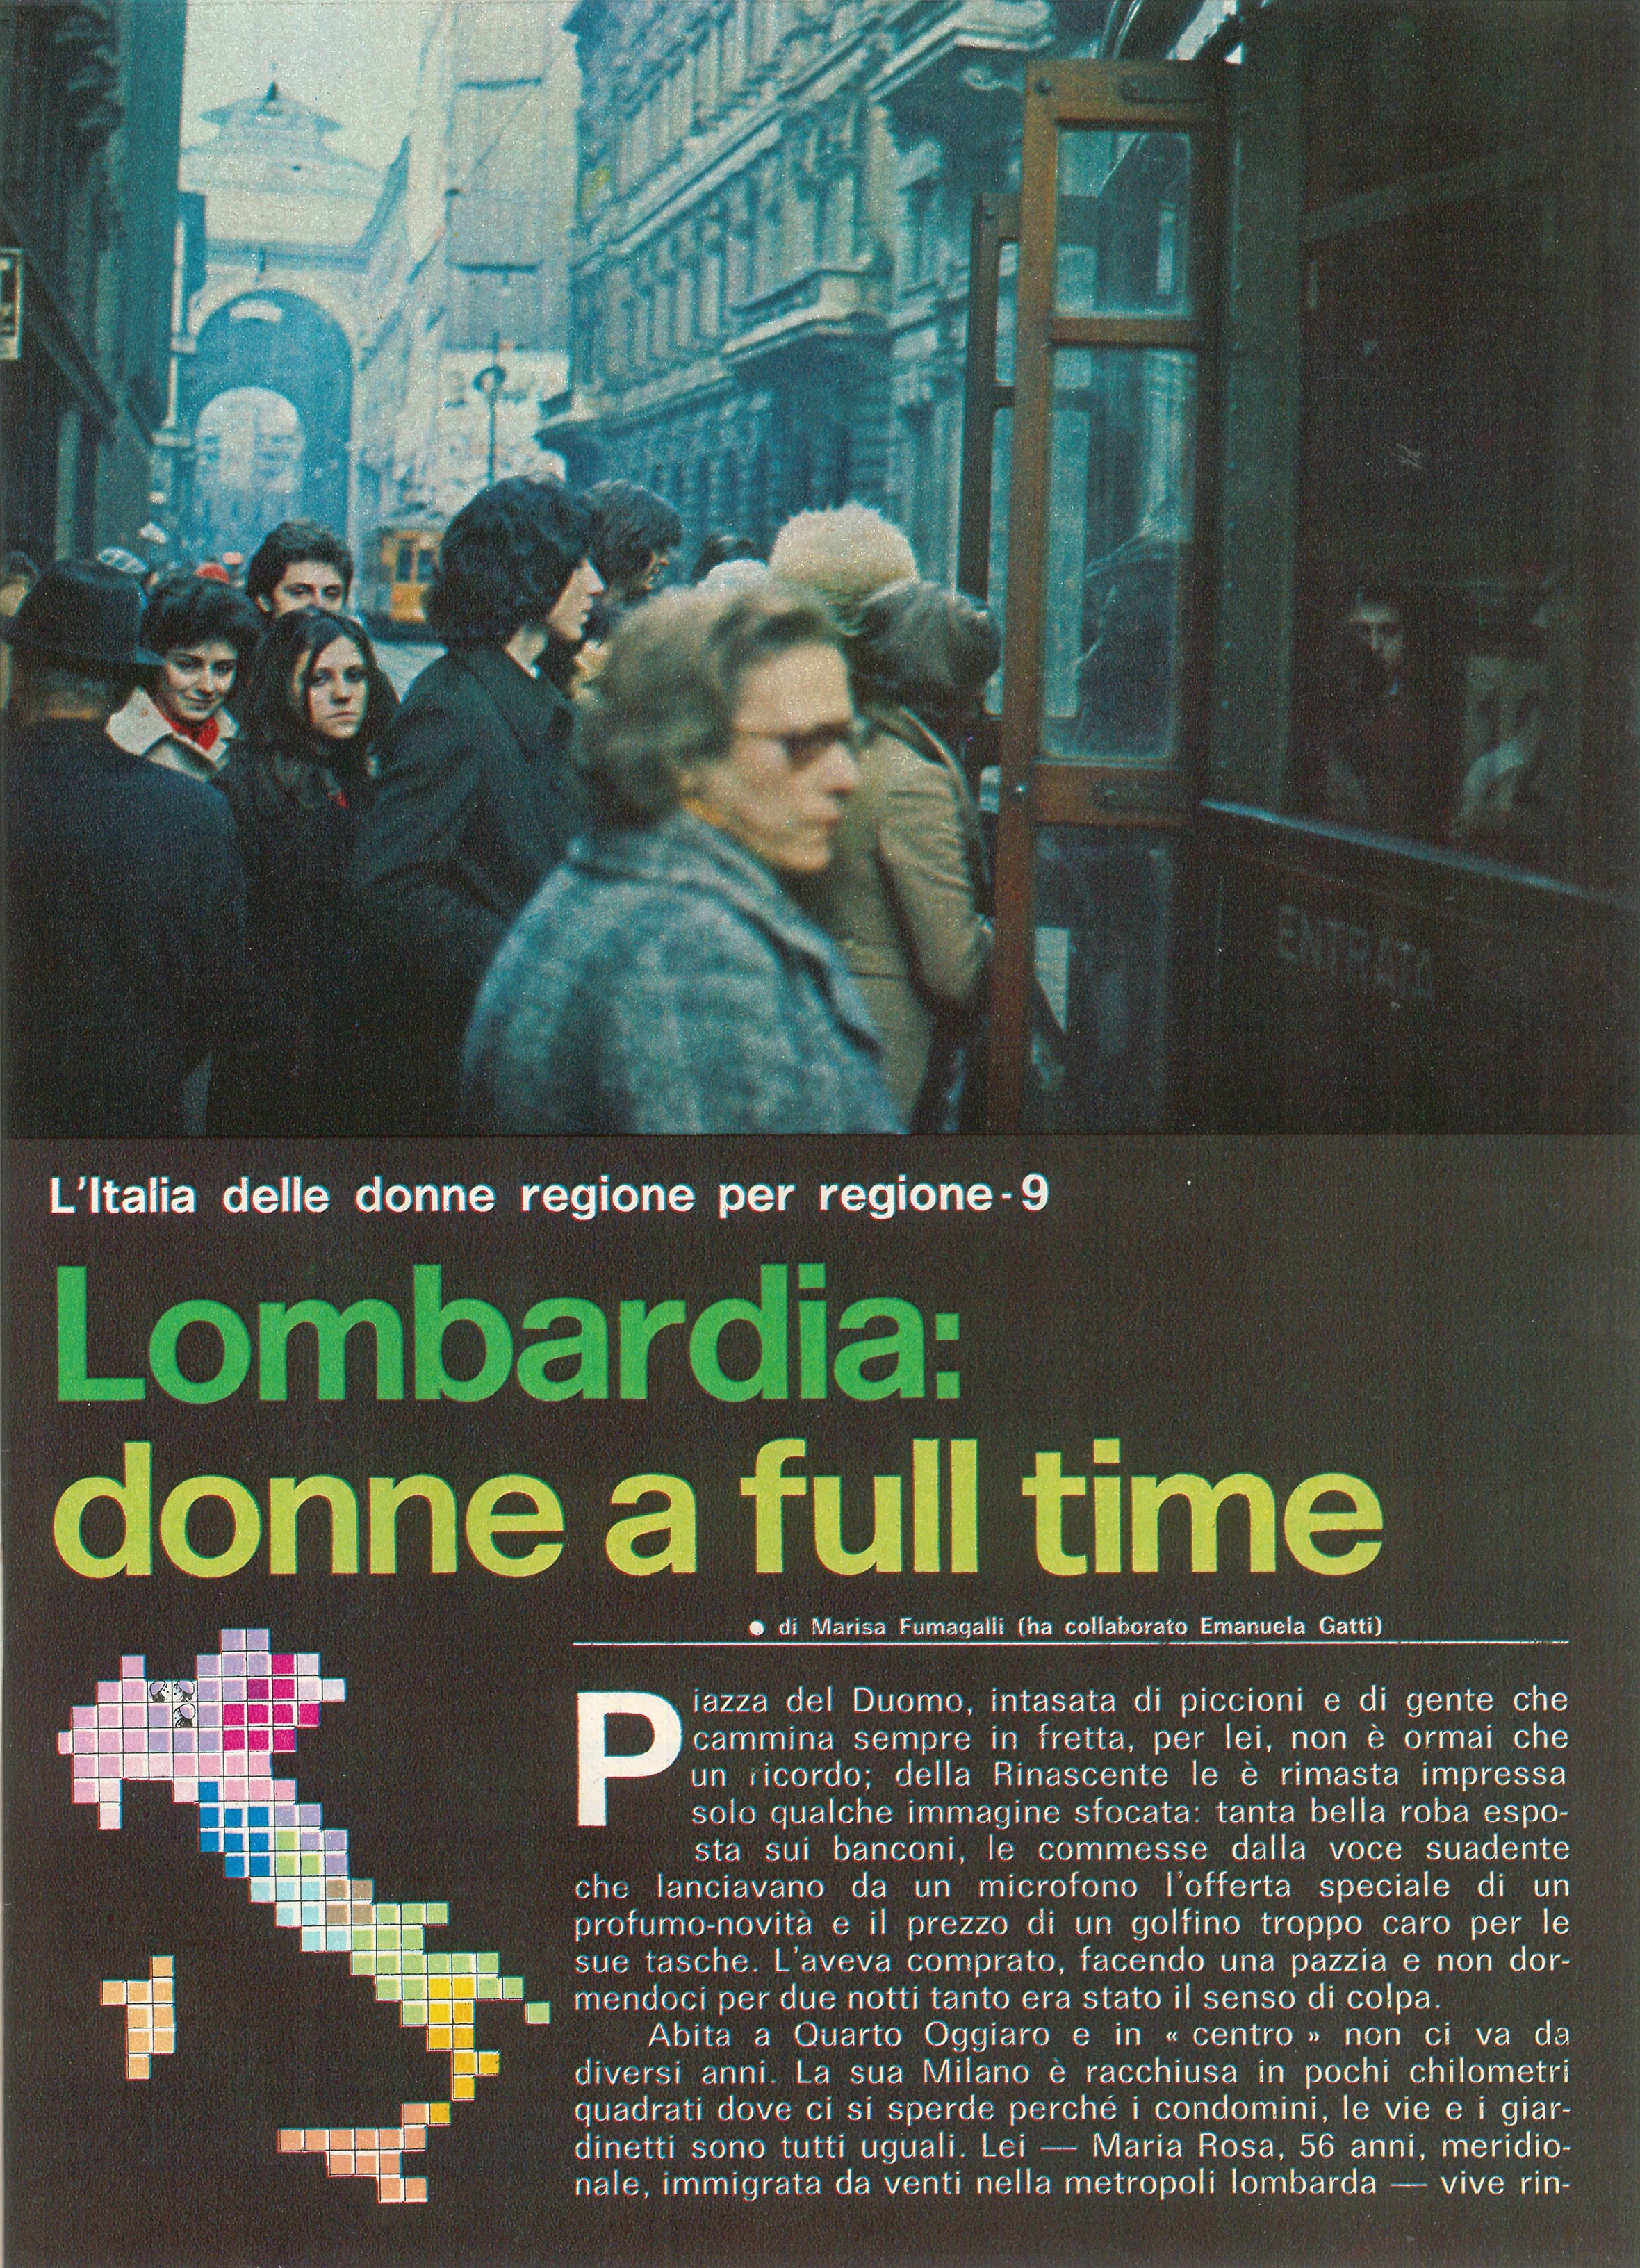 Foto: Lombardia:donne full time